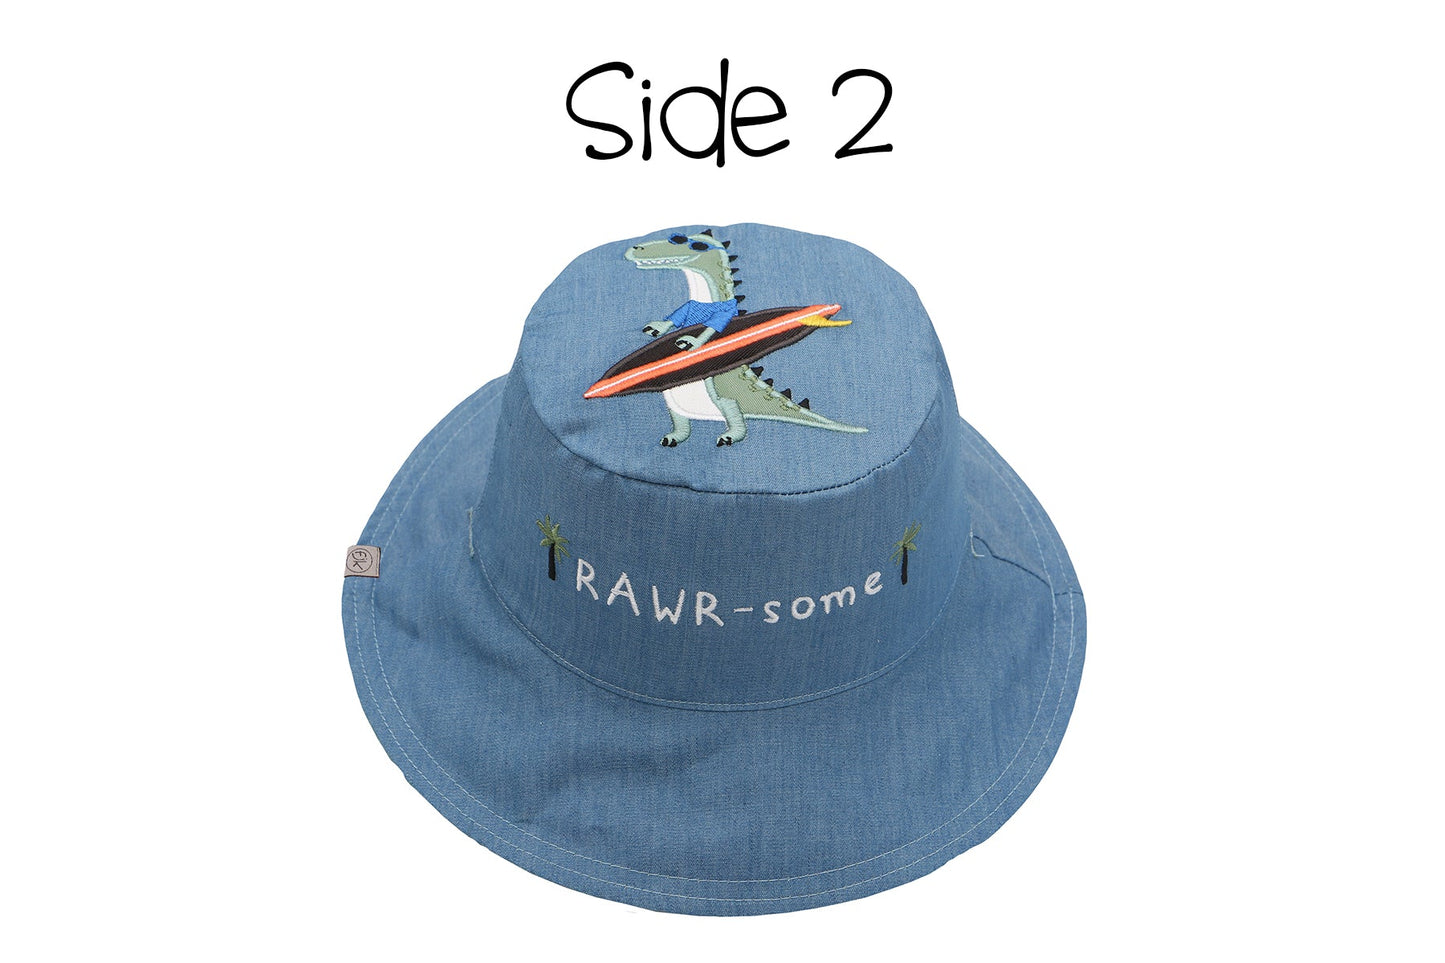 FlapJack Baby/Toddler UPF50 Reversible 3D Cotton Bucket Hat Dino/Surfer Dino